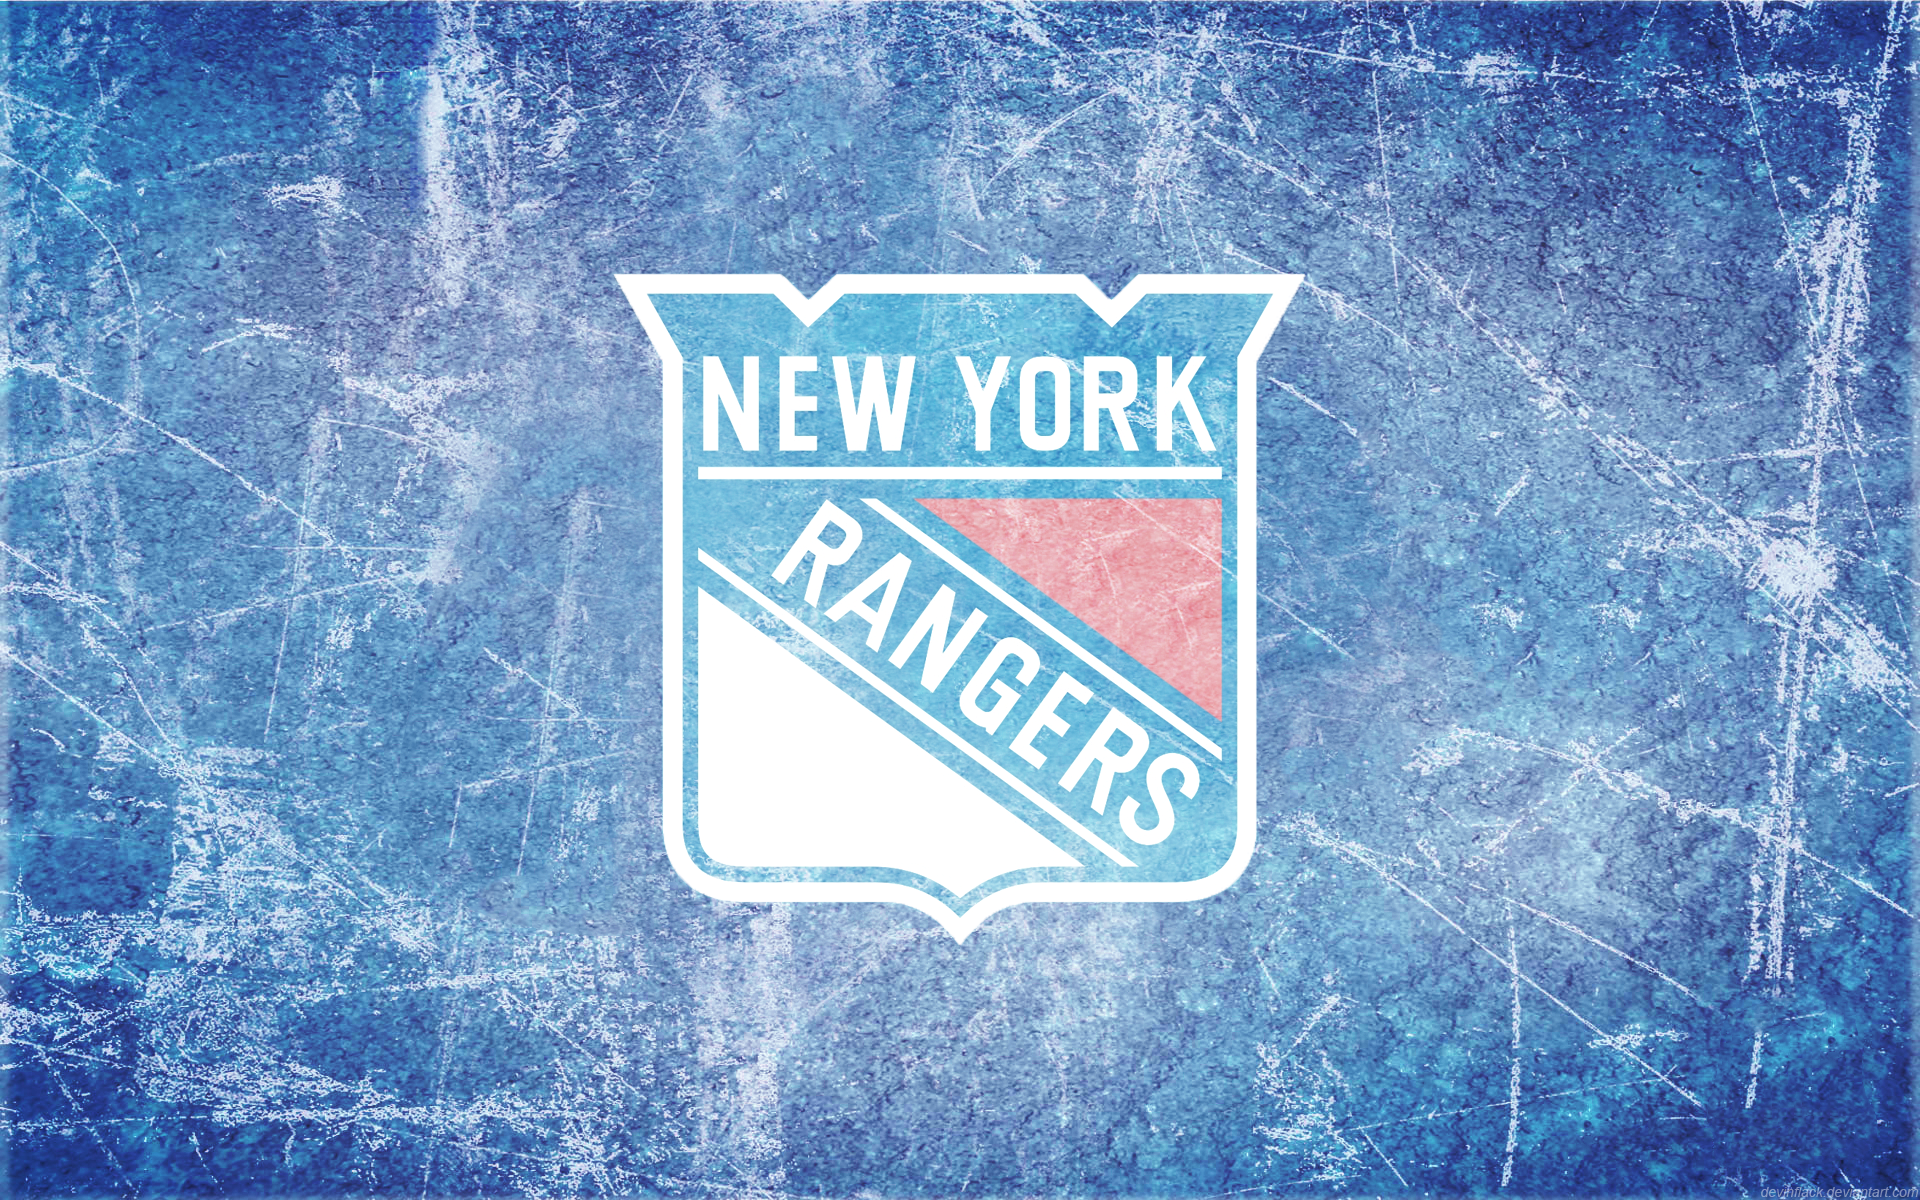 New York Rangers wallpapers New York Rangers background   Page 3